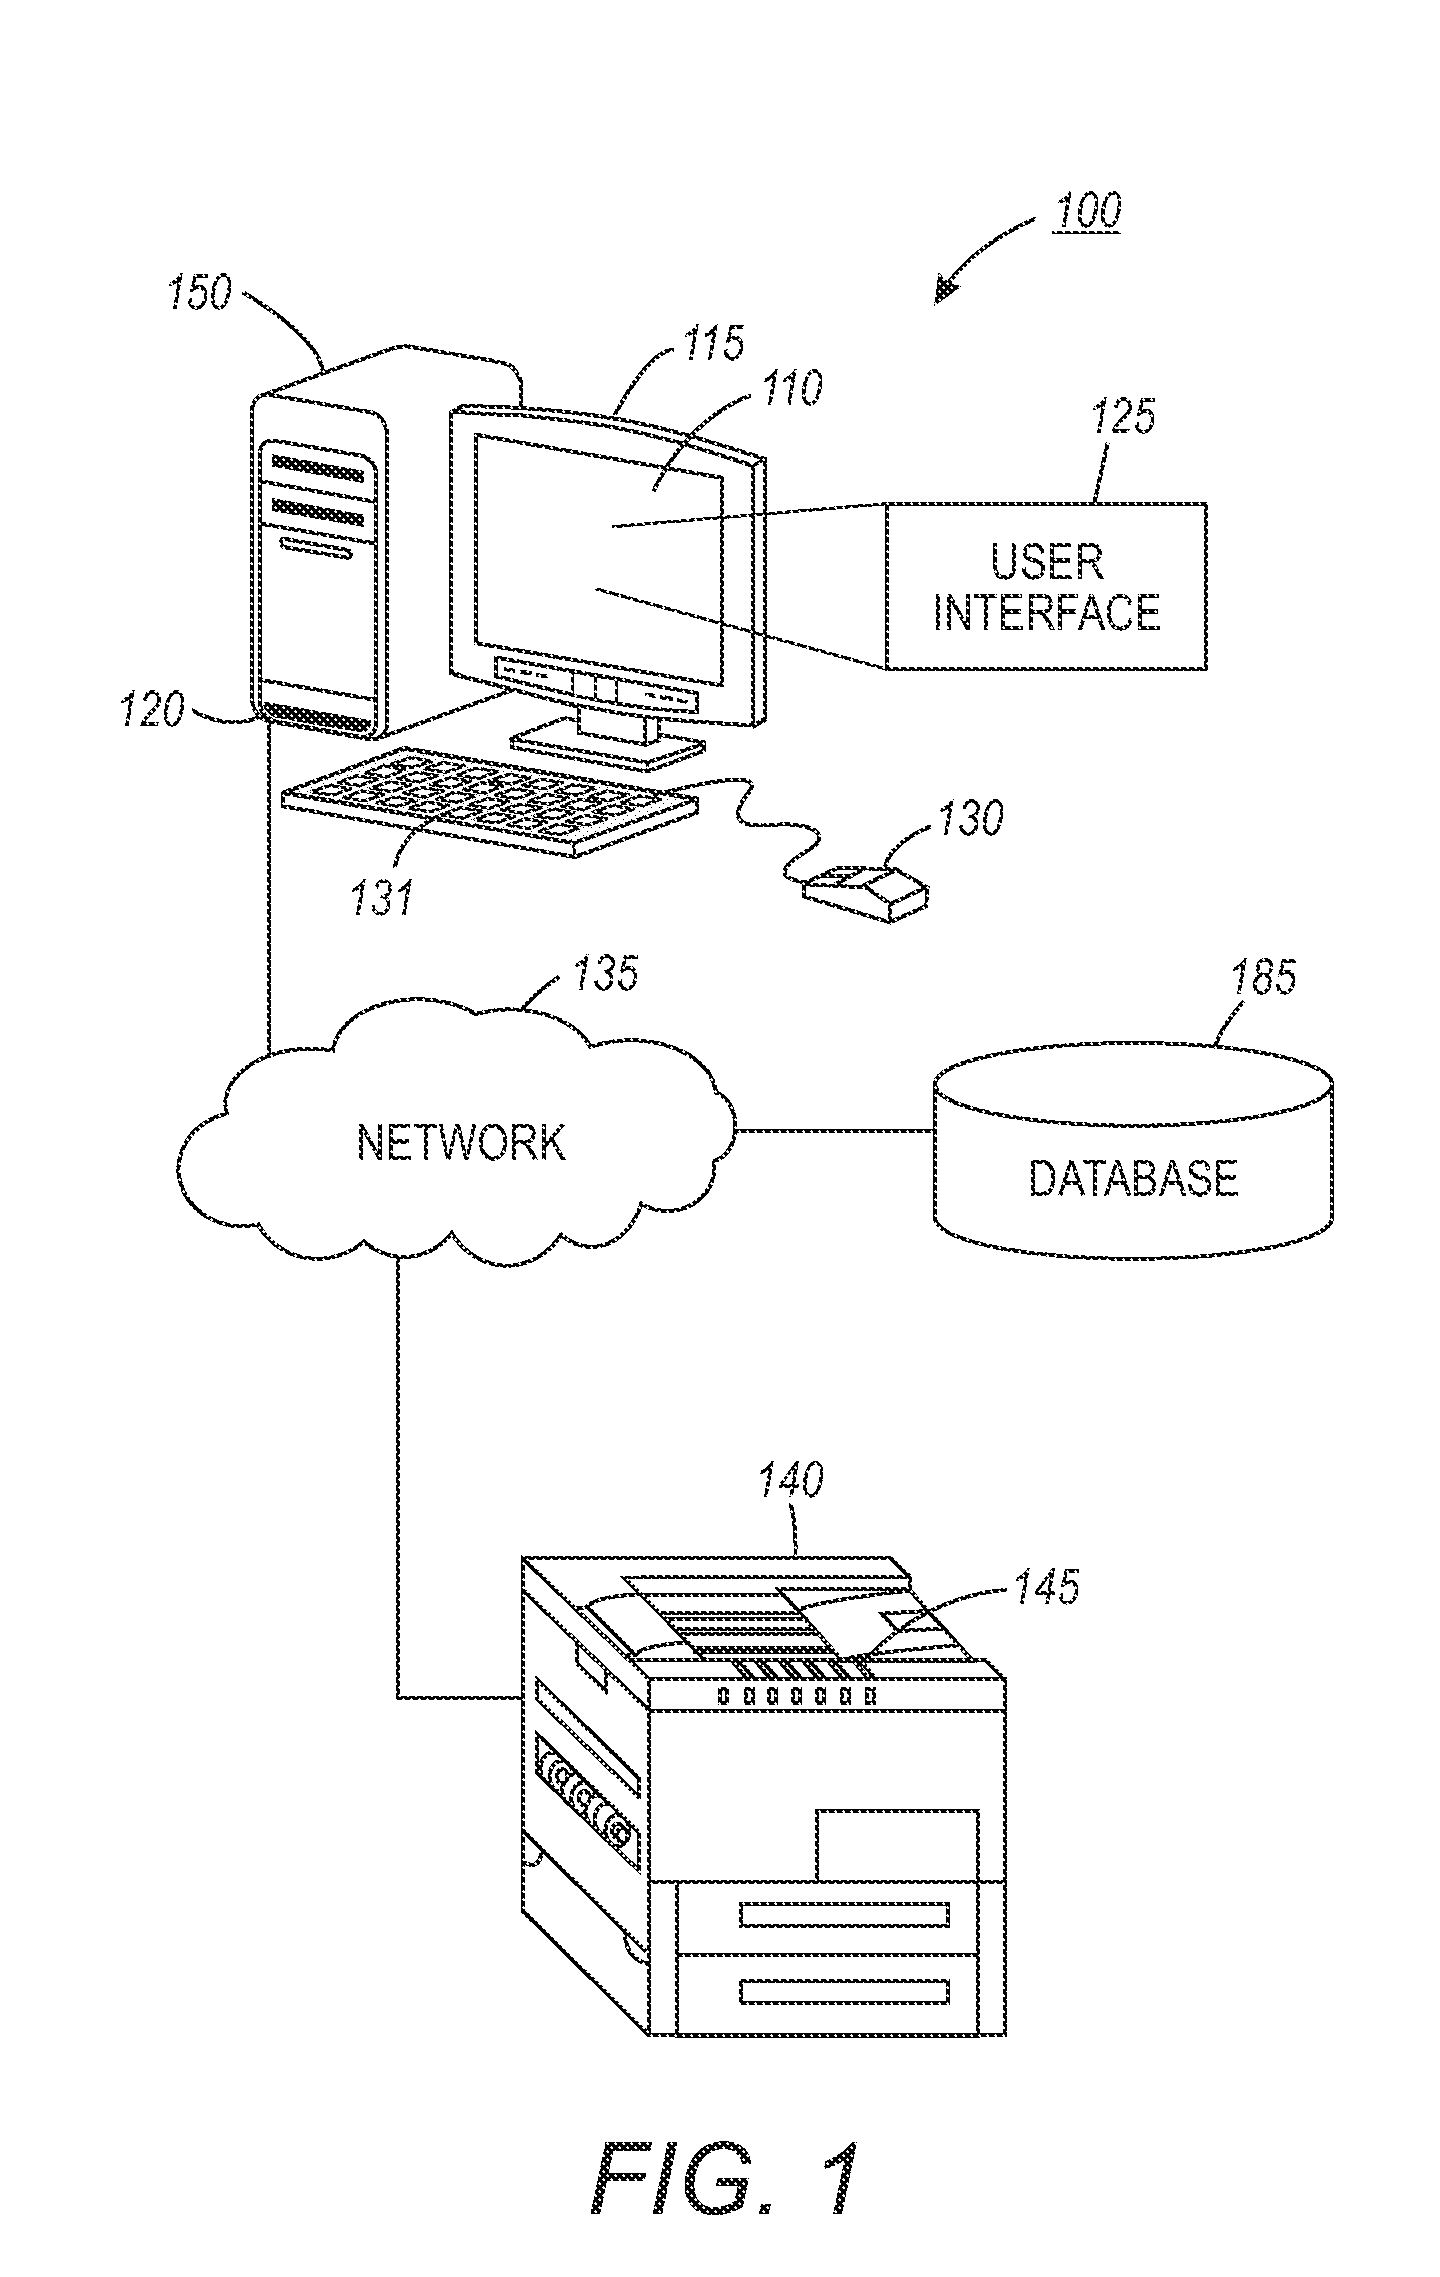 Augmented reality system and method for device management and service